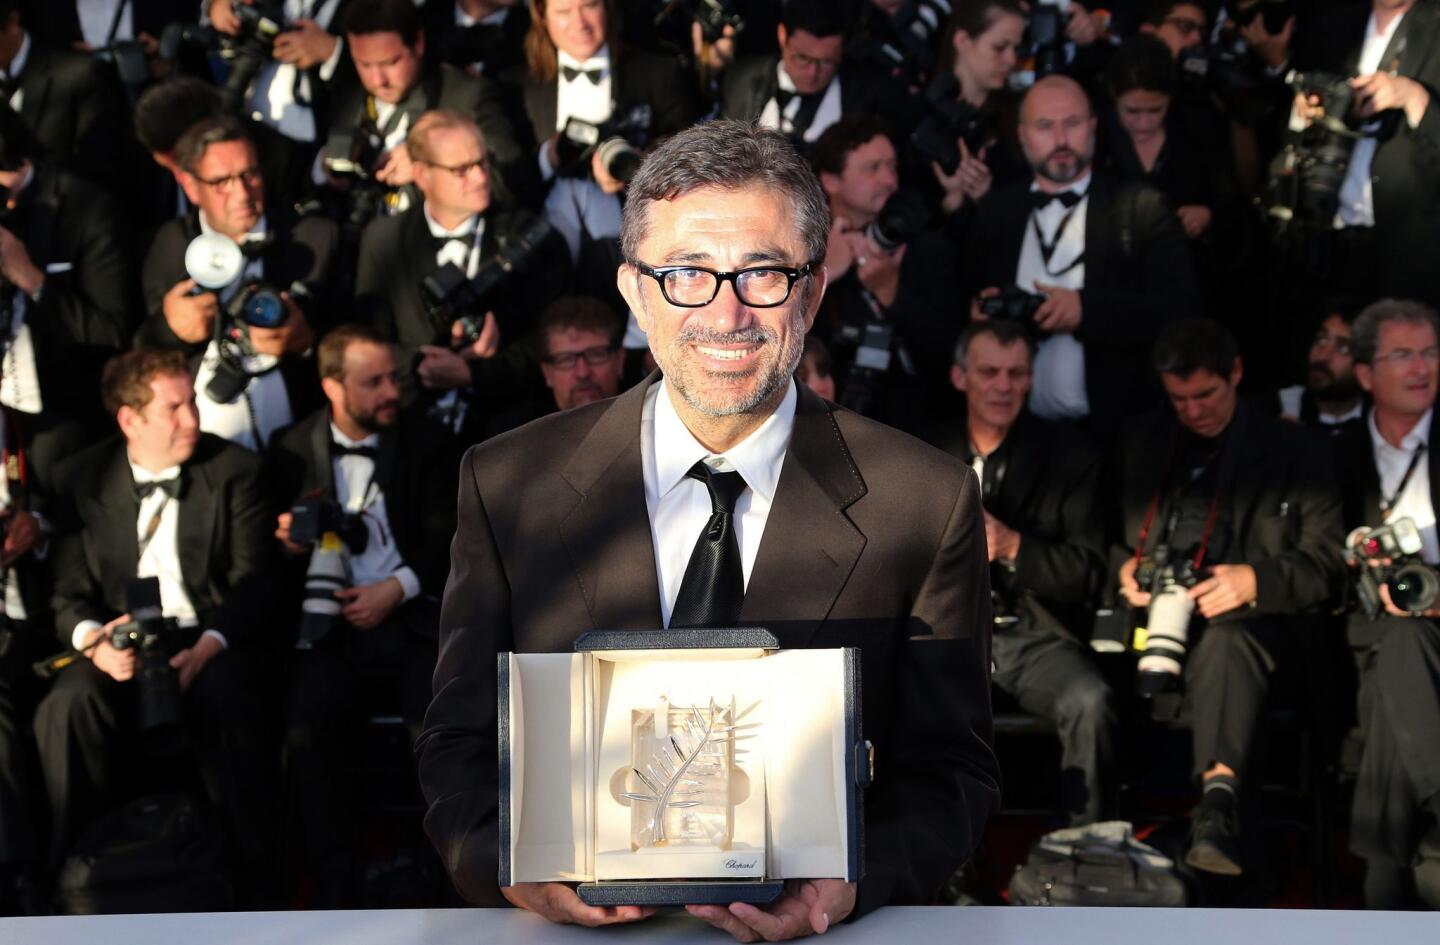 Turkish director Nuri Bilge Ceylan poses with the Palme d'Or for the film "Winter Sleep" after the closing ceremony of the Cannes Film Festival.